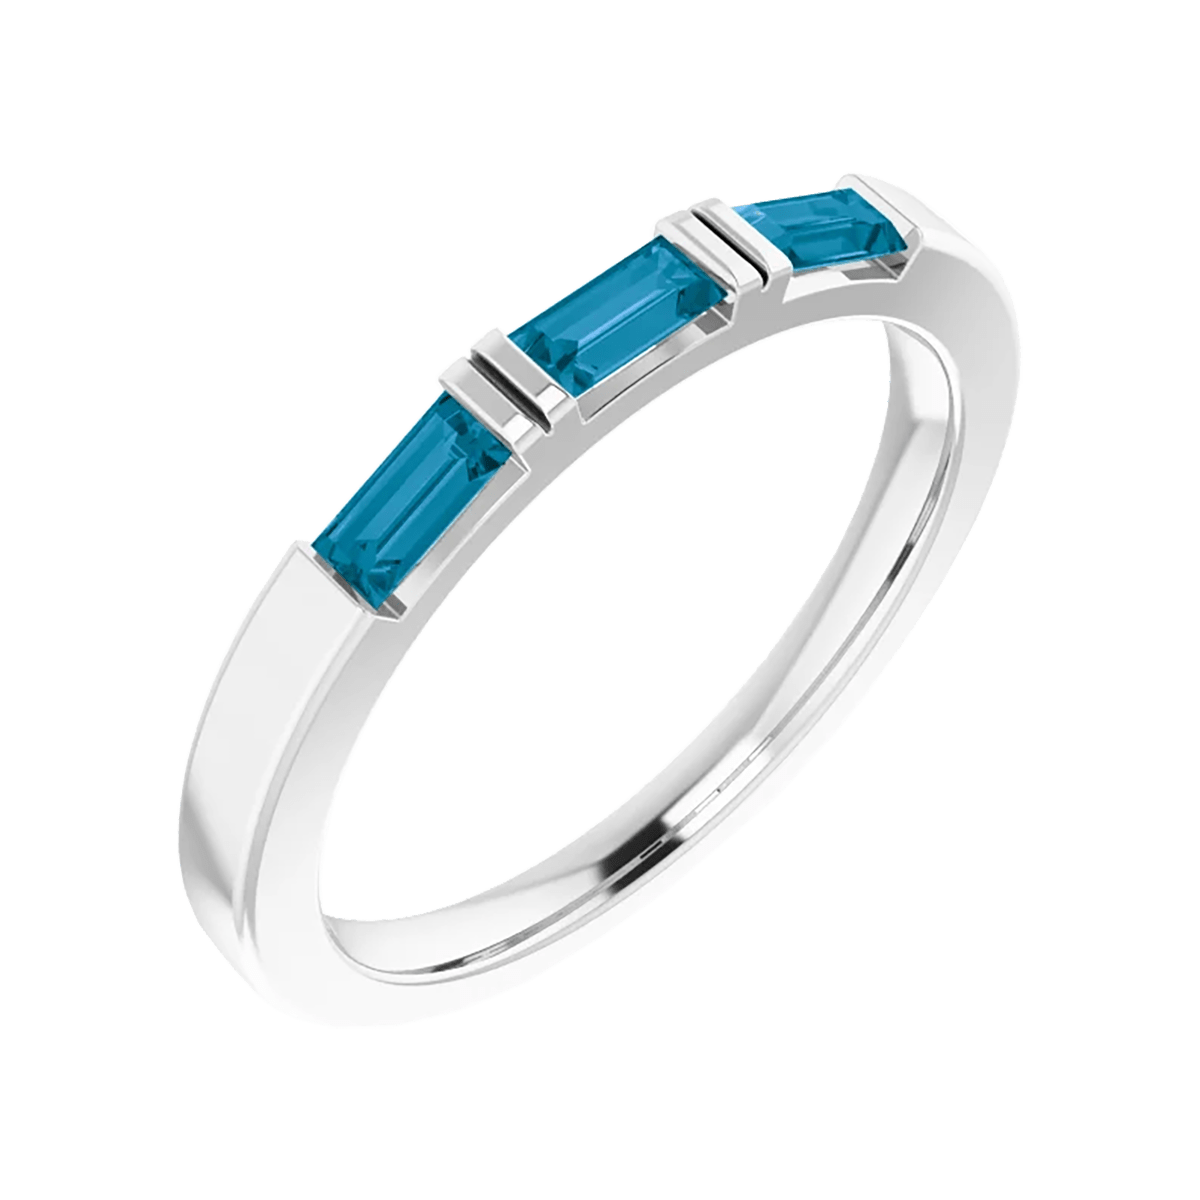 Blue Topaz Stackable Band